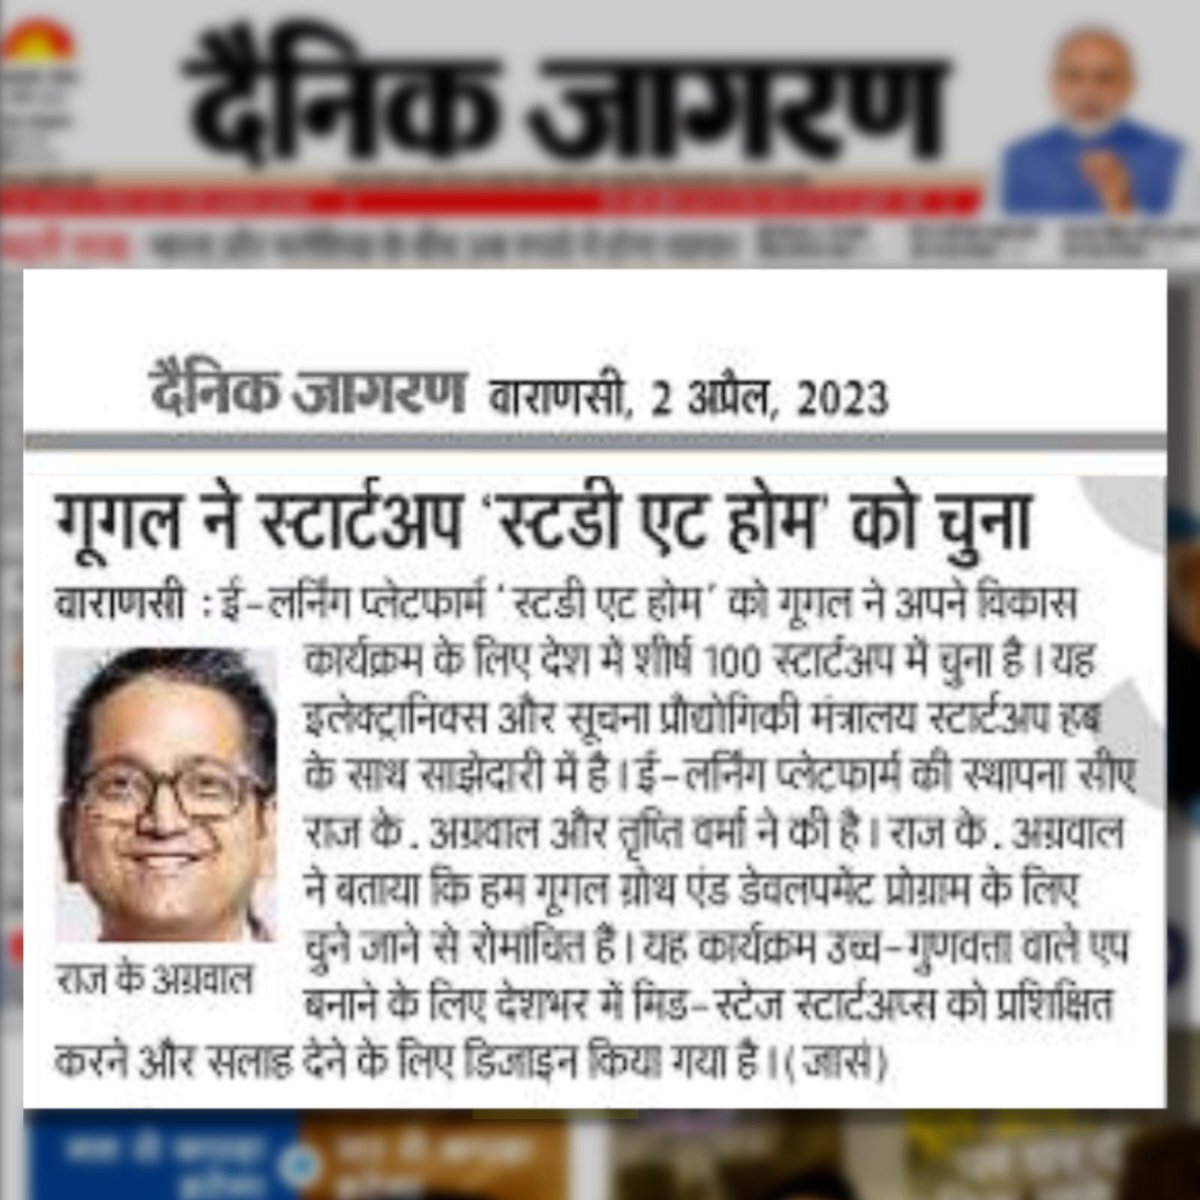 We're thrilled to share that we've been featured in the prestigious Dainik Jagran newspaper on April 2, 2023. 
As Google selected Study At Home as one of the top 100 startups in the country for its development program.

 #startups #google #appscaleacademy2023 #studyathome #edtech